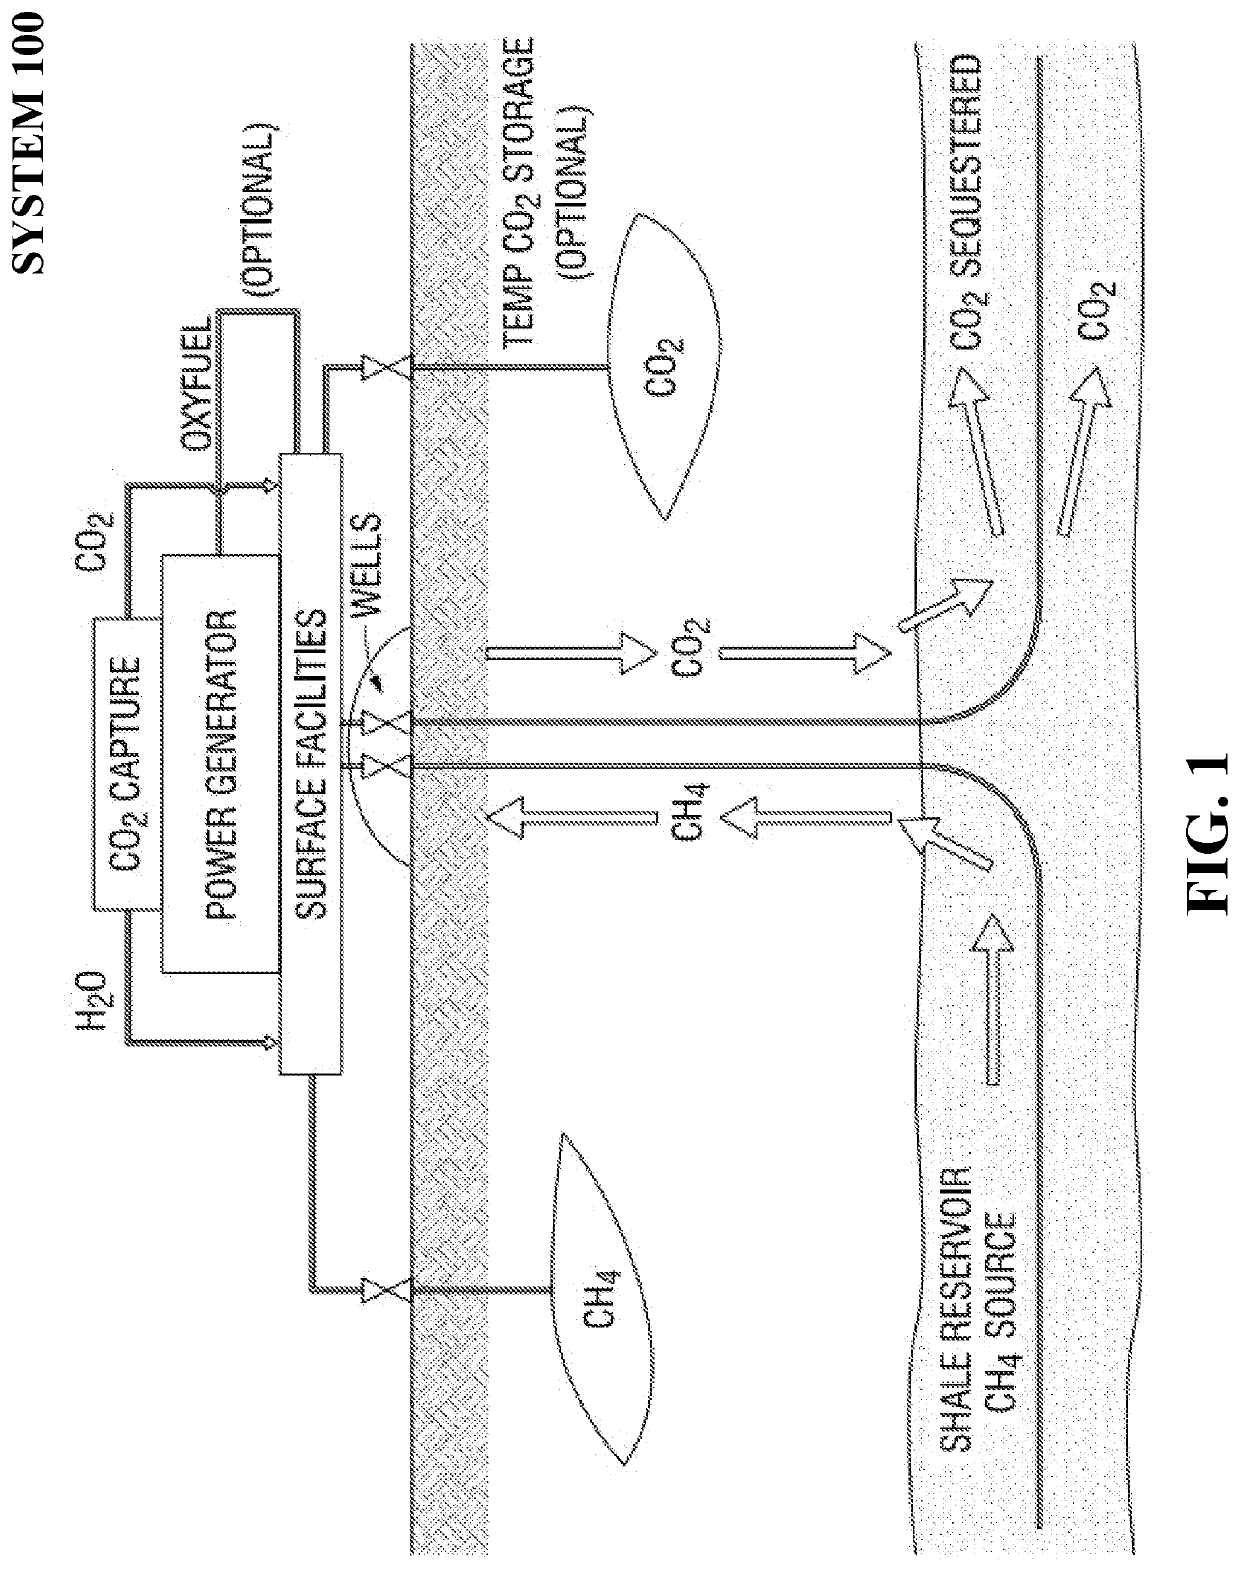 System and method for permanent storage of carbon dioxide in shale reservoirs